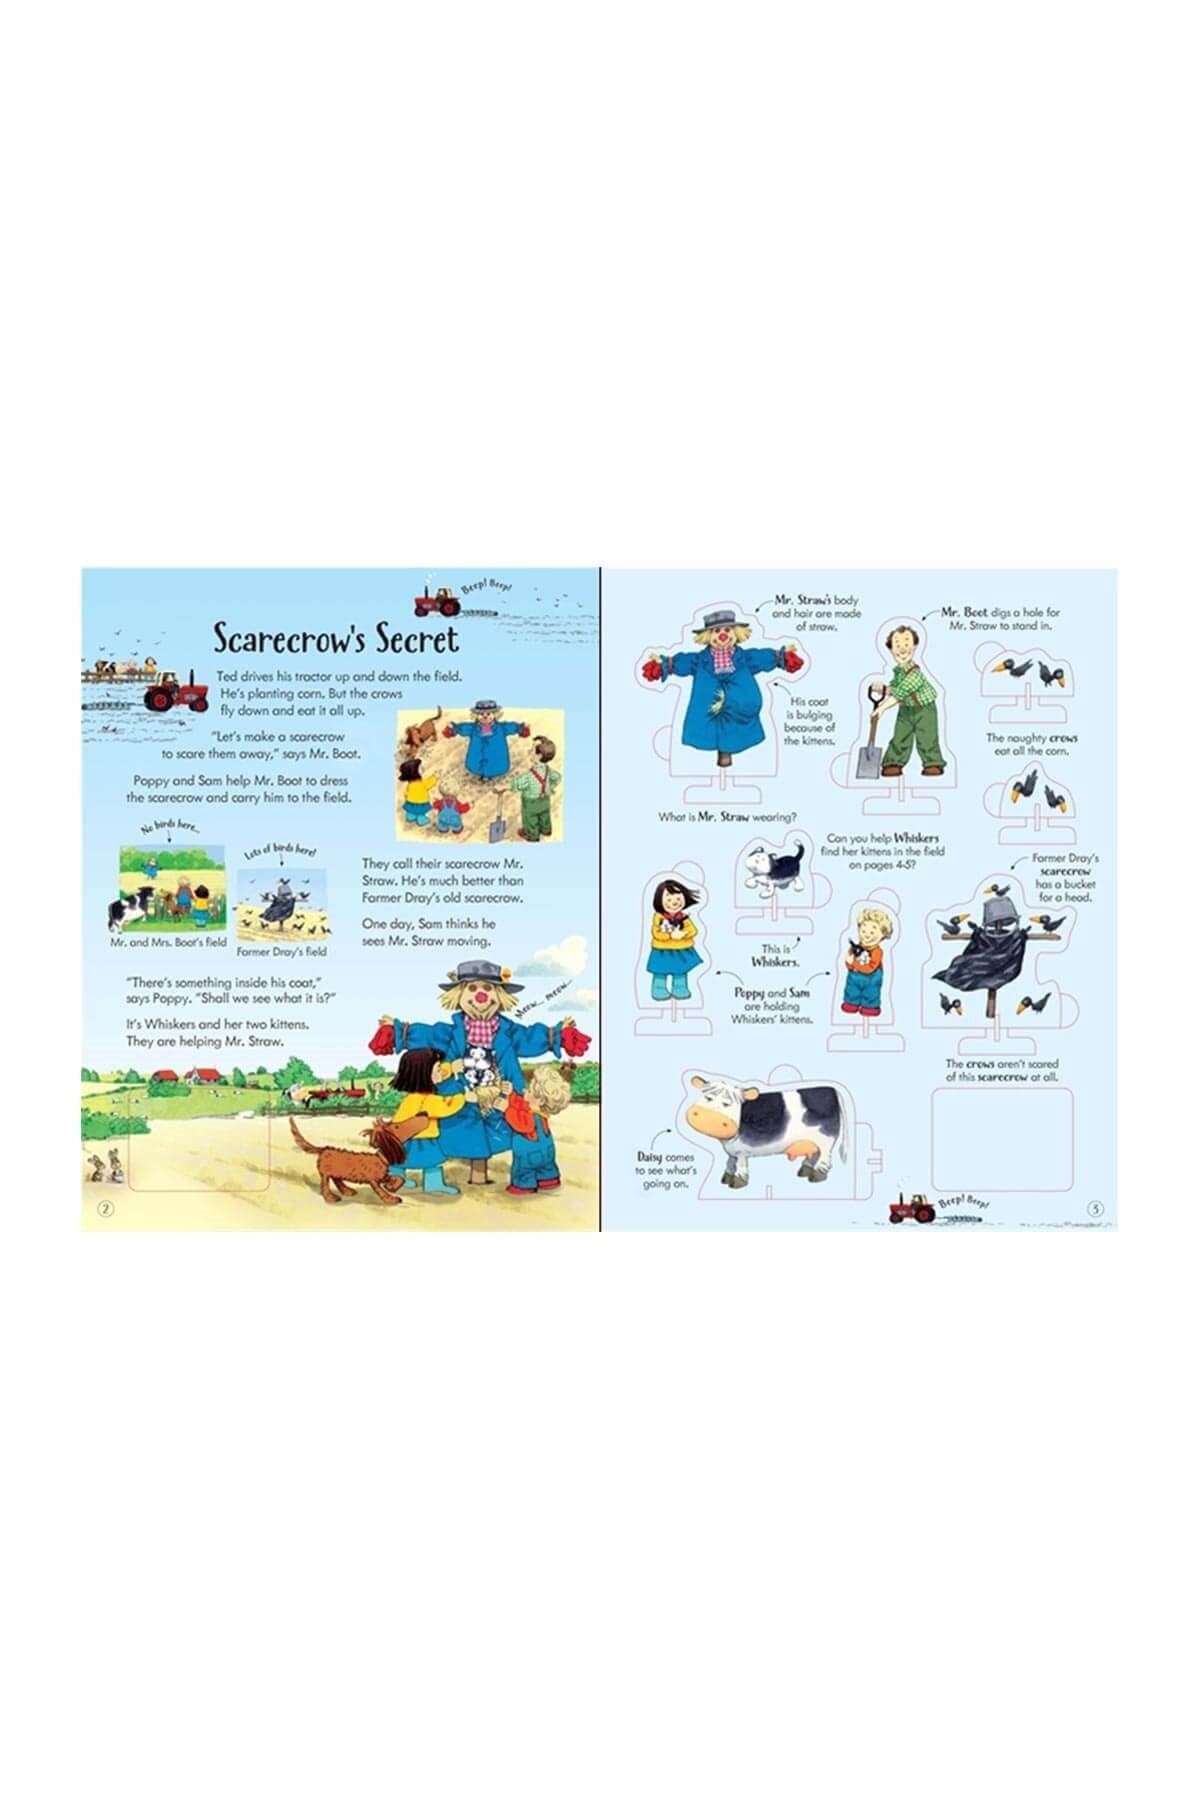 The Usborne Fyt Poppy And Sam's Wind-Up Tractor Book